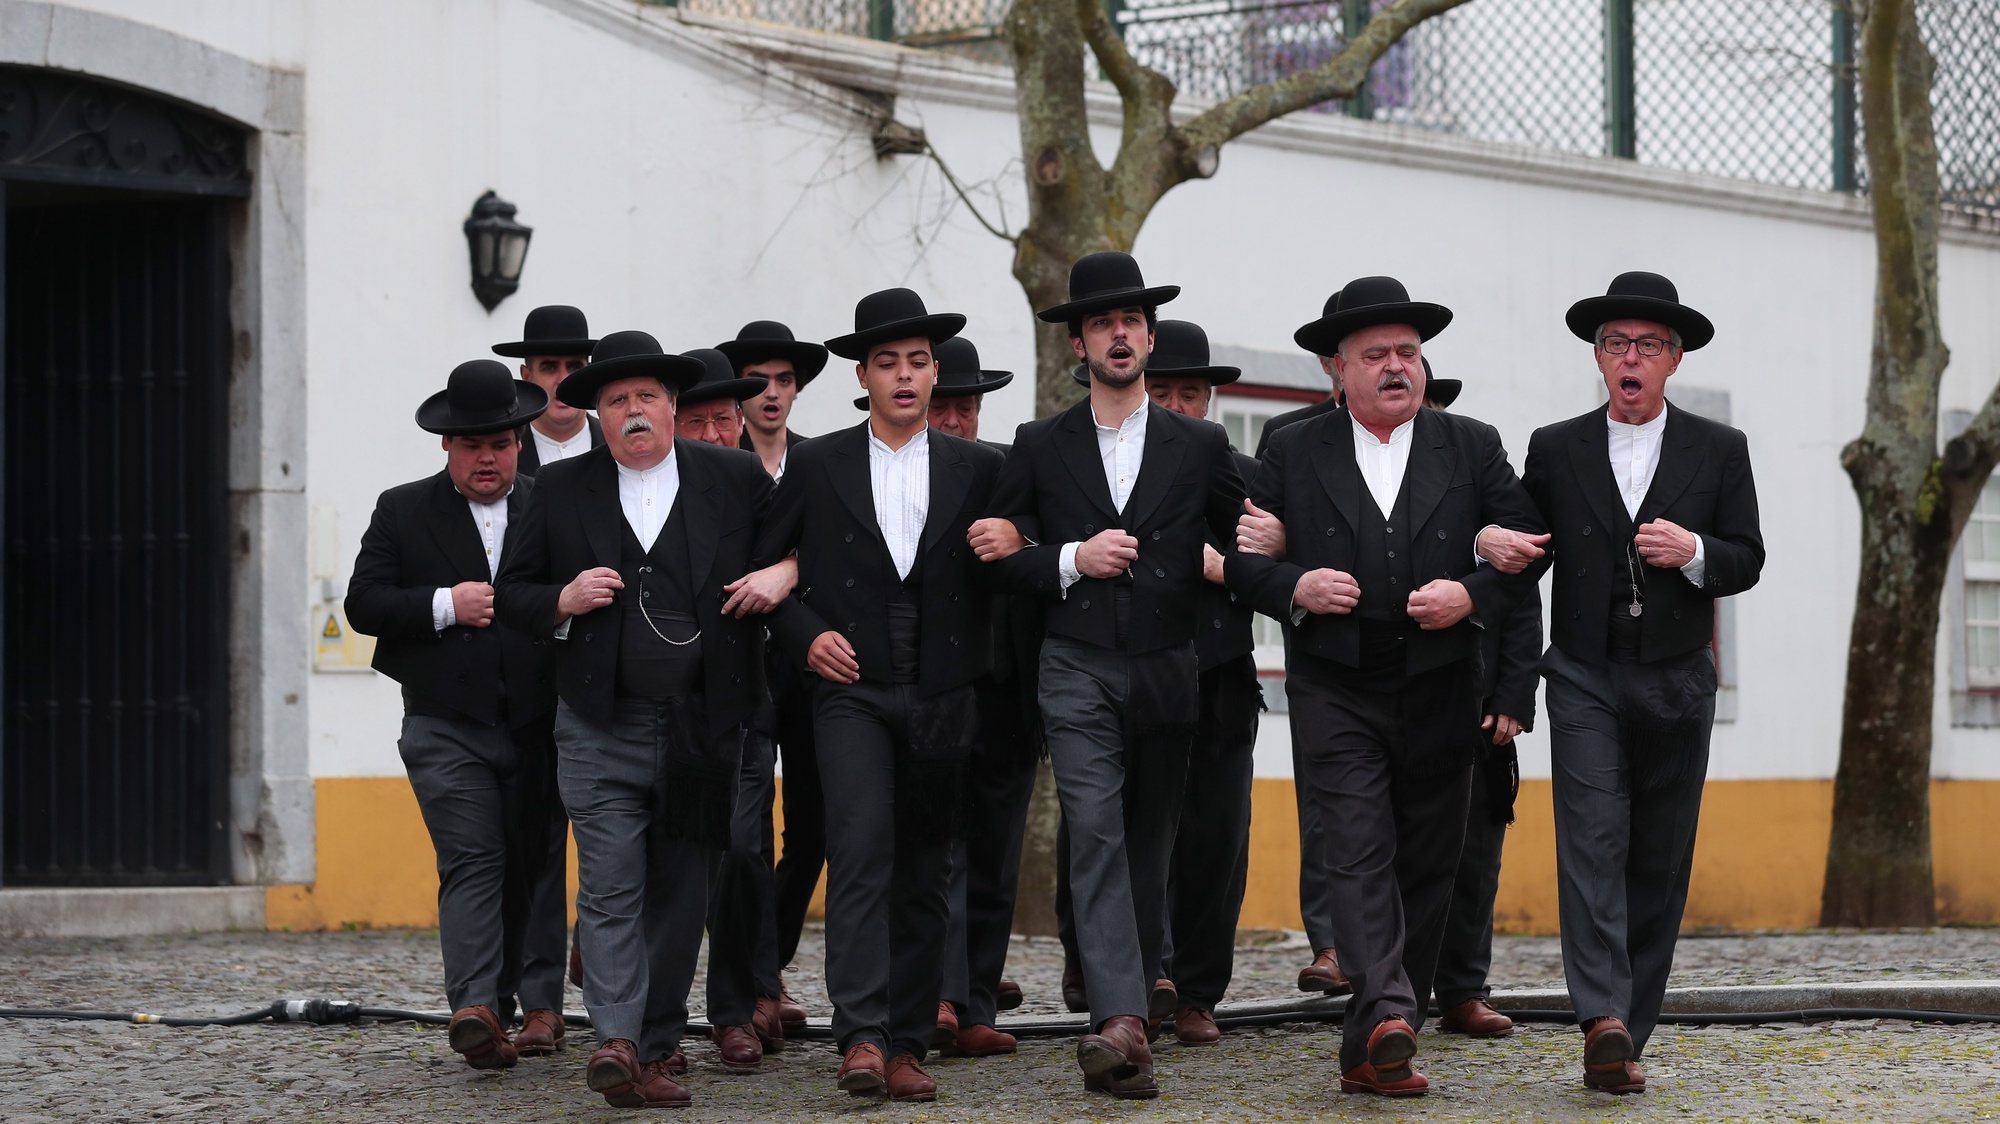 &#039;Cante alentejano&#039; singers perform prior to a group photo of European leaders attending the Friends of Cohesion Group meeting in Beja, Portugal, 01 February 2020. The informal group, which is made up of 17 EU member states in eastern and southern Europe, gathered in Portugal to discuss further steps in defending the cohesion and agricultural policies in the next Multiannual Financial Framework (MFF), media reported.  NUNO VEIGA/LUSA